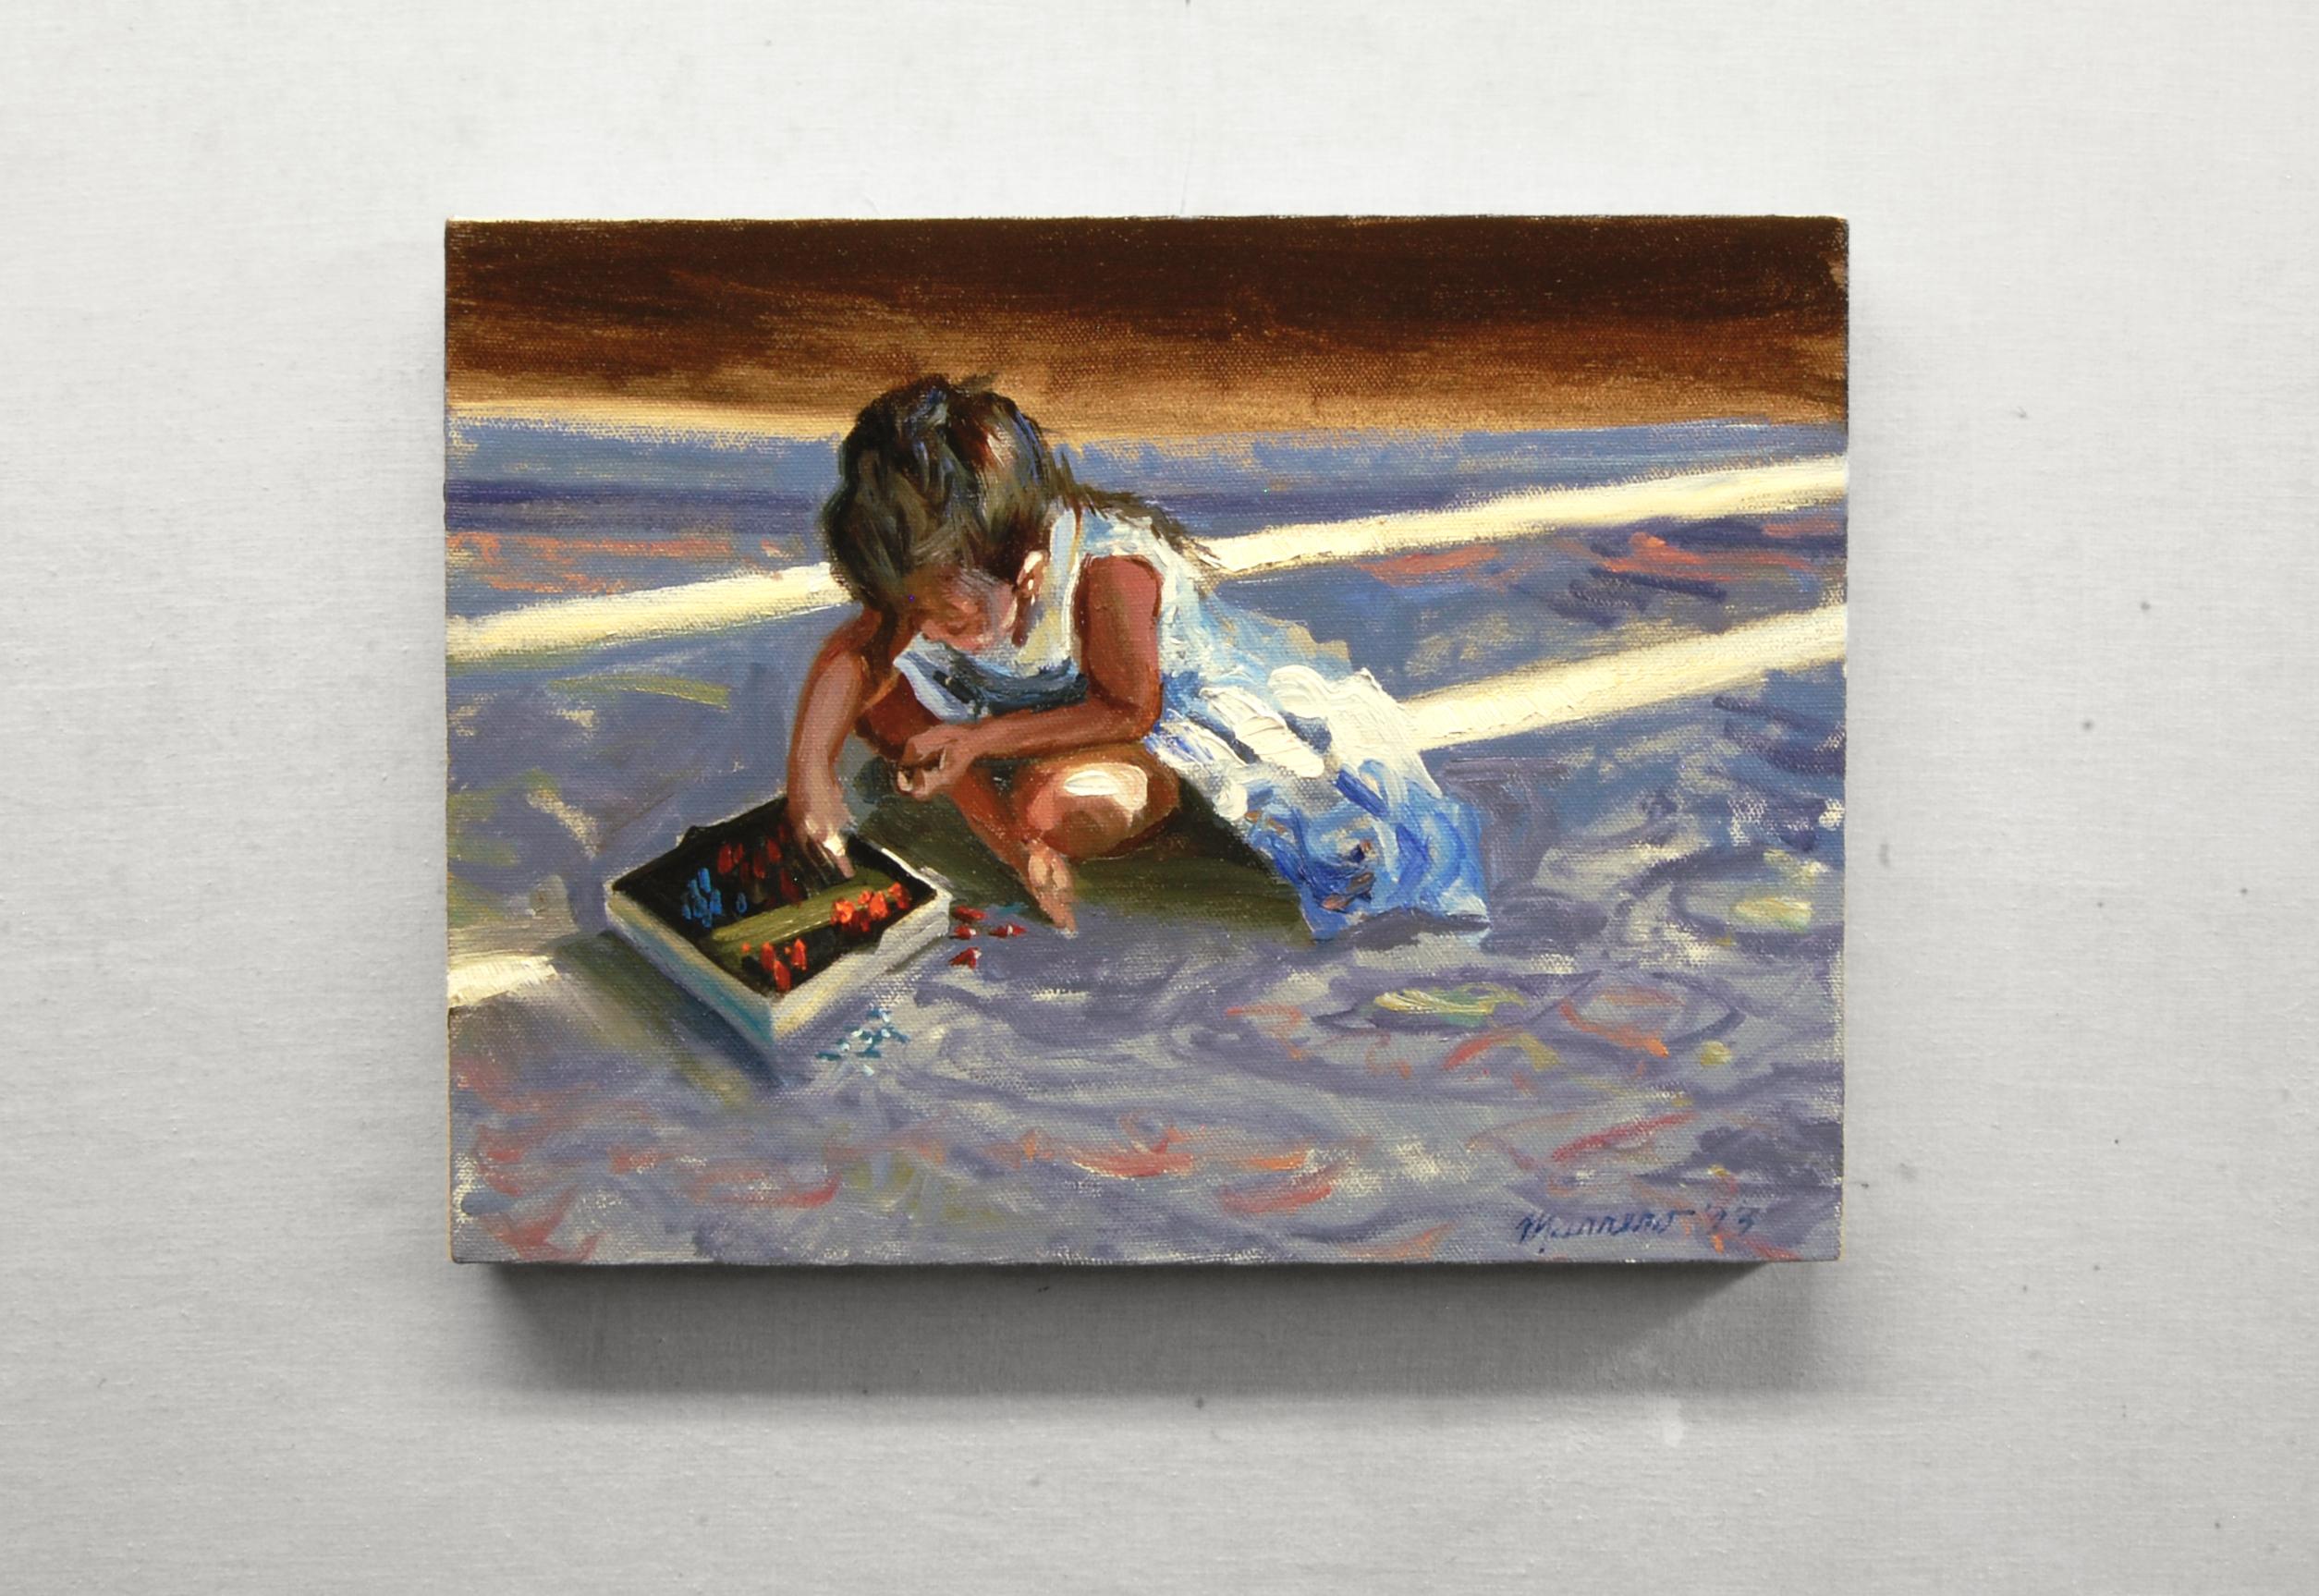 <p>Artist Comments<br>Artist Onelio Marrero shows an endearing image of his granddaughter playing with a Lite-Briteâ€”a toy first popularized in the late 1960s. As he paints her quietly playing, the image of Sargent's work, 